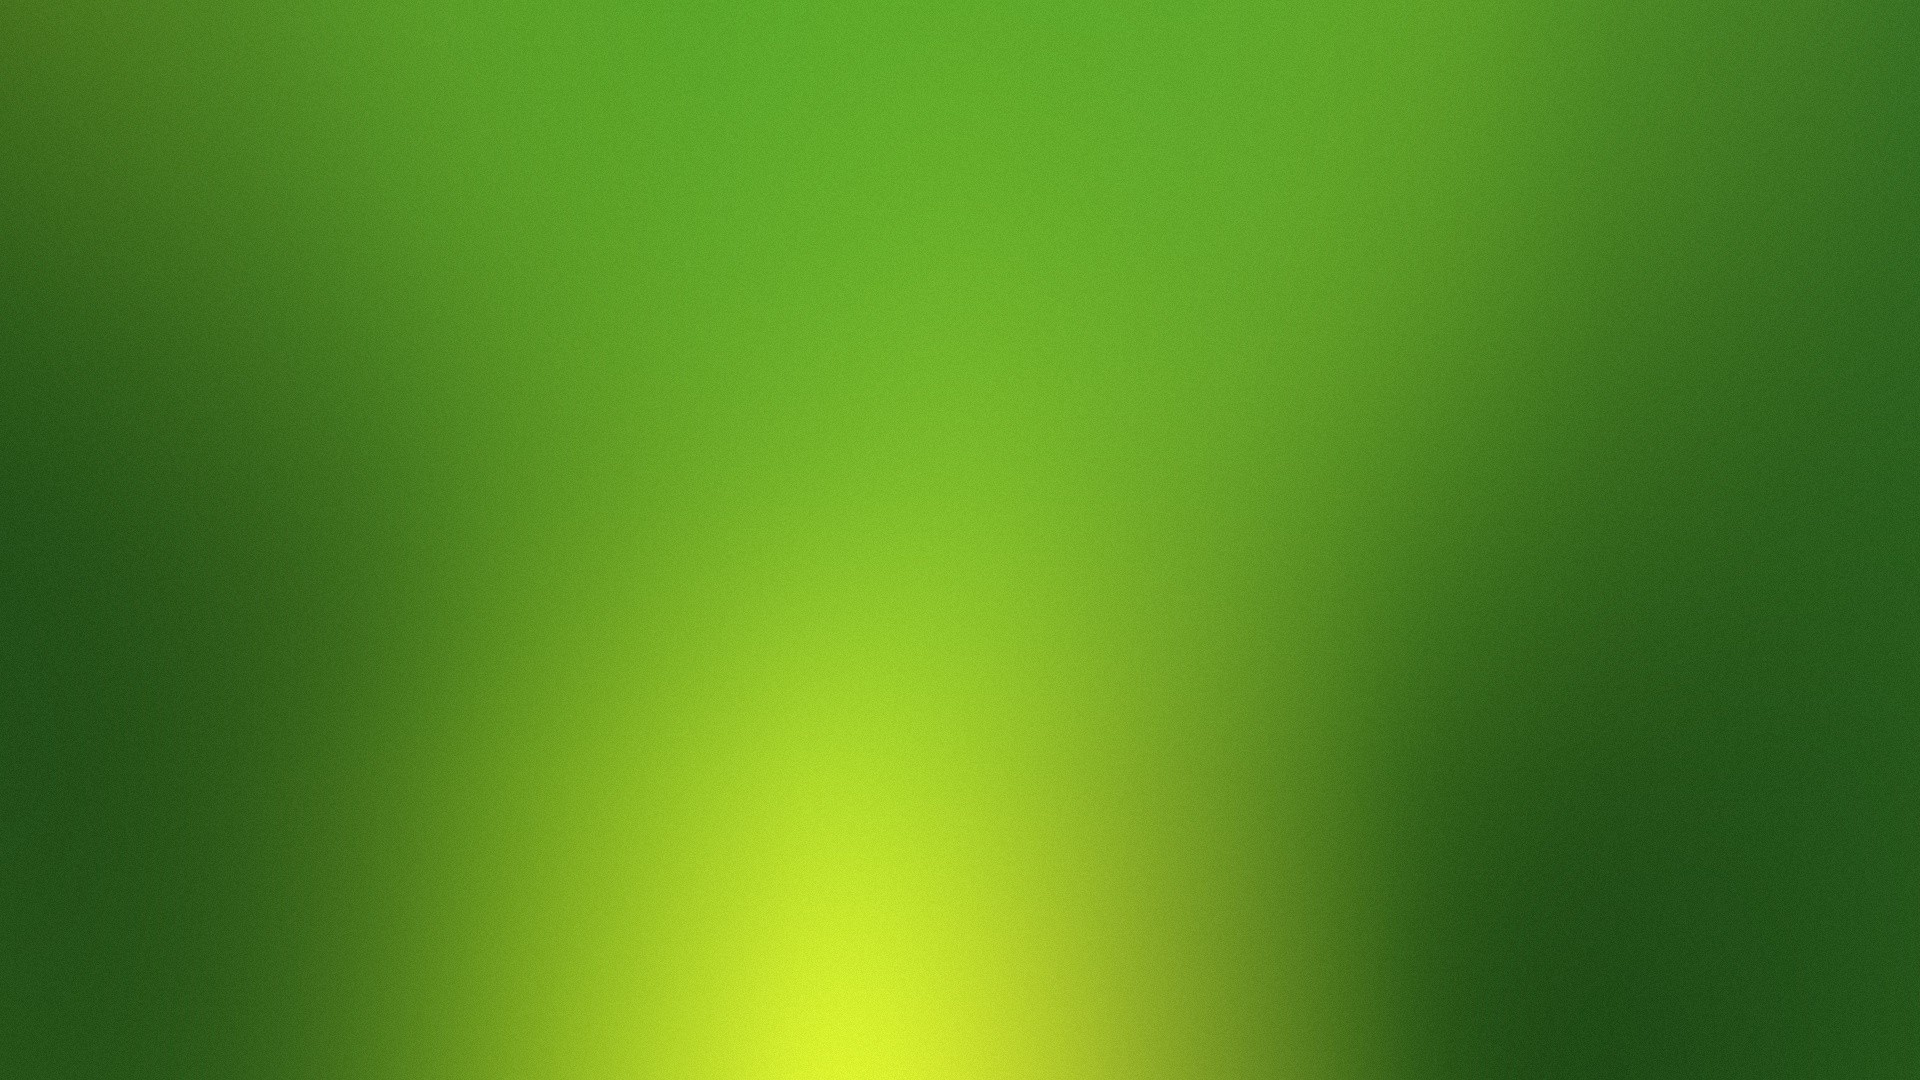  green  Gradient  Wallpapers  HD Desktop and Mobile Backgrounds